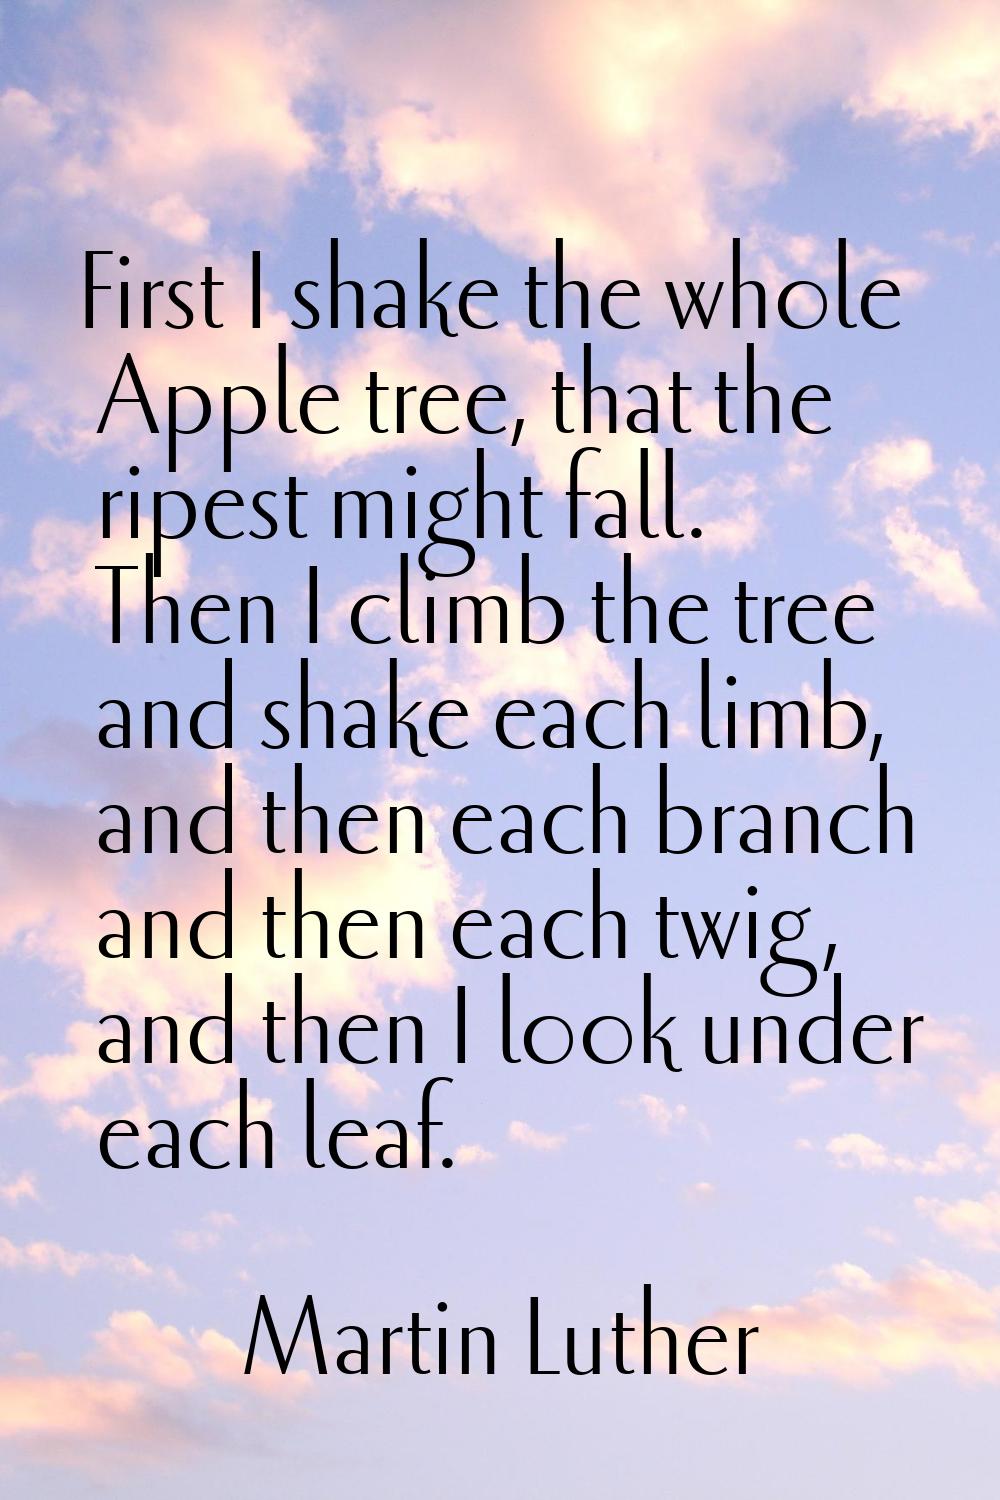 First I shake the whole Apple tree, that the ripest might fall. Then I climb the tree and shake eac